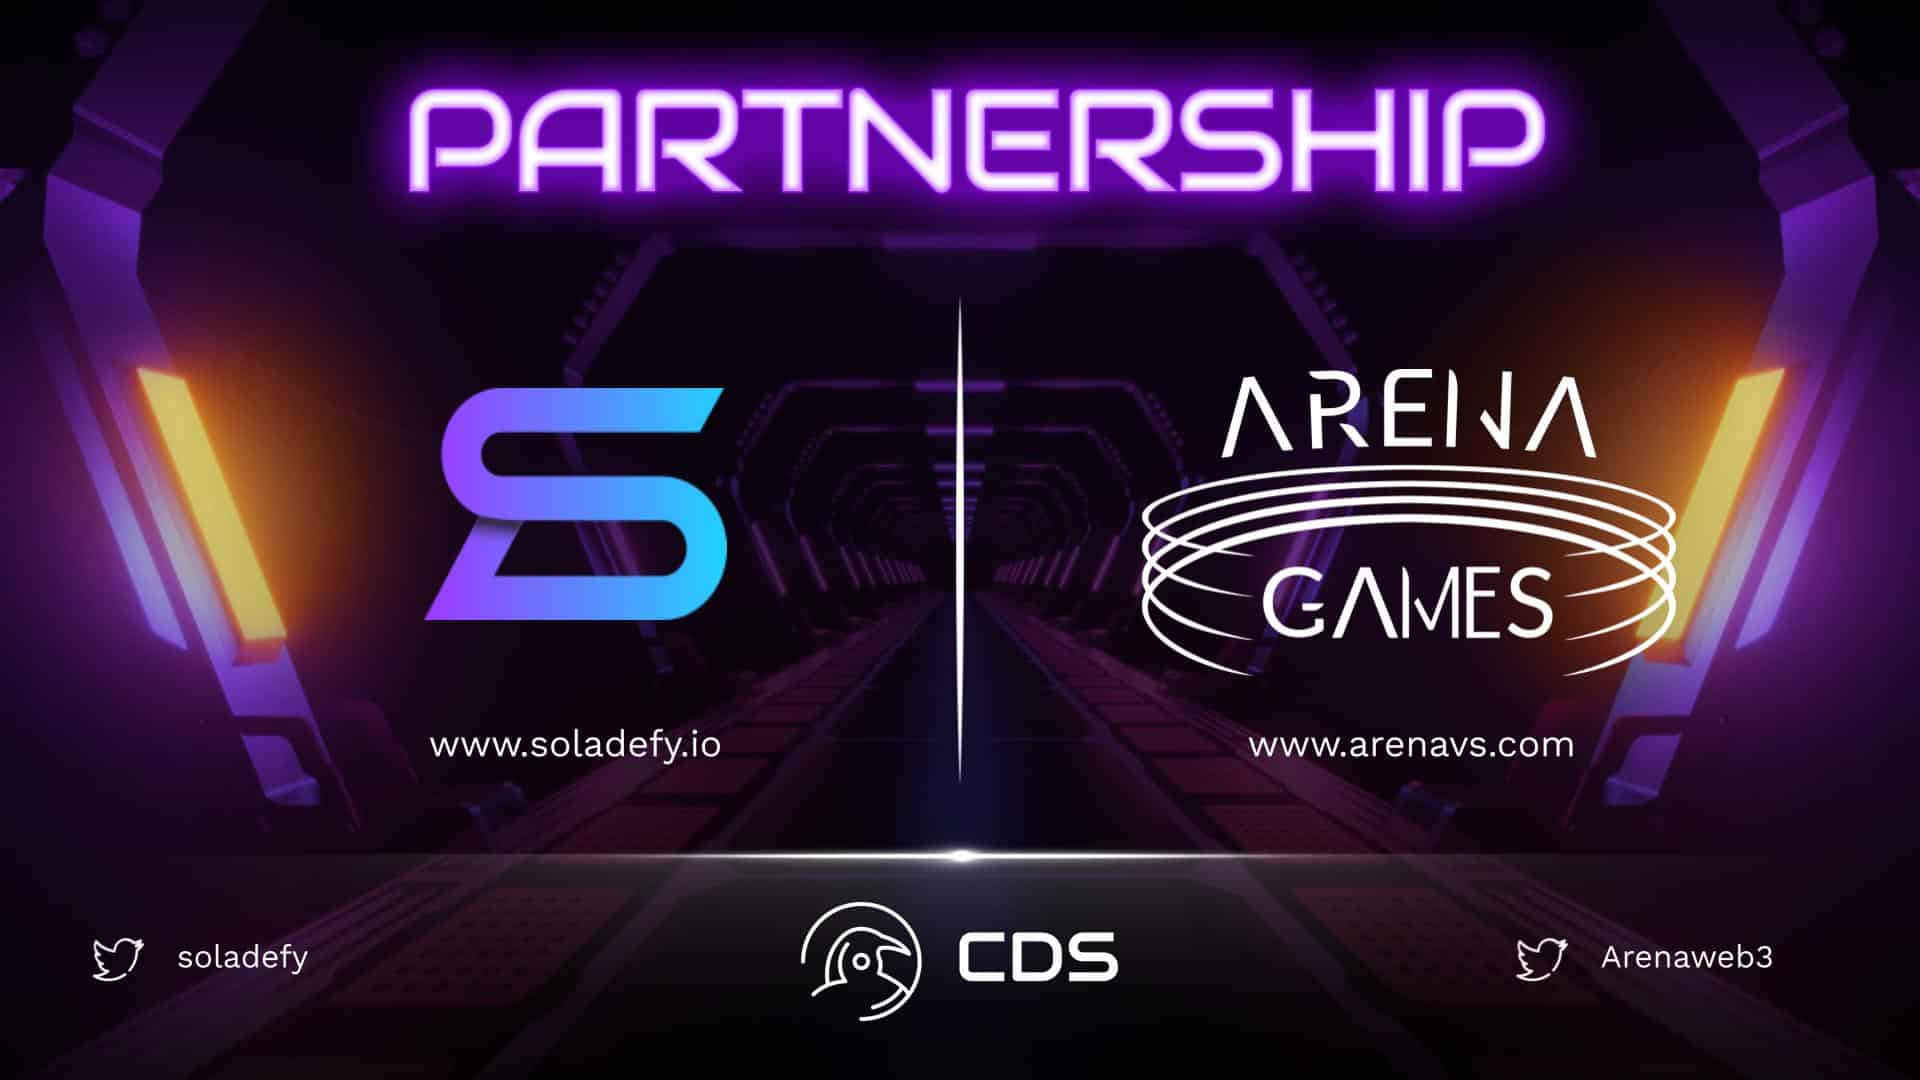 SolaDefy Partnership with Arena Games